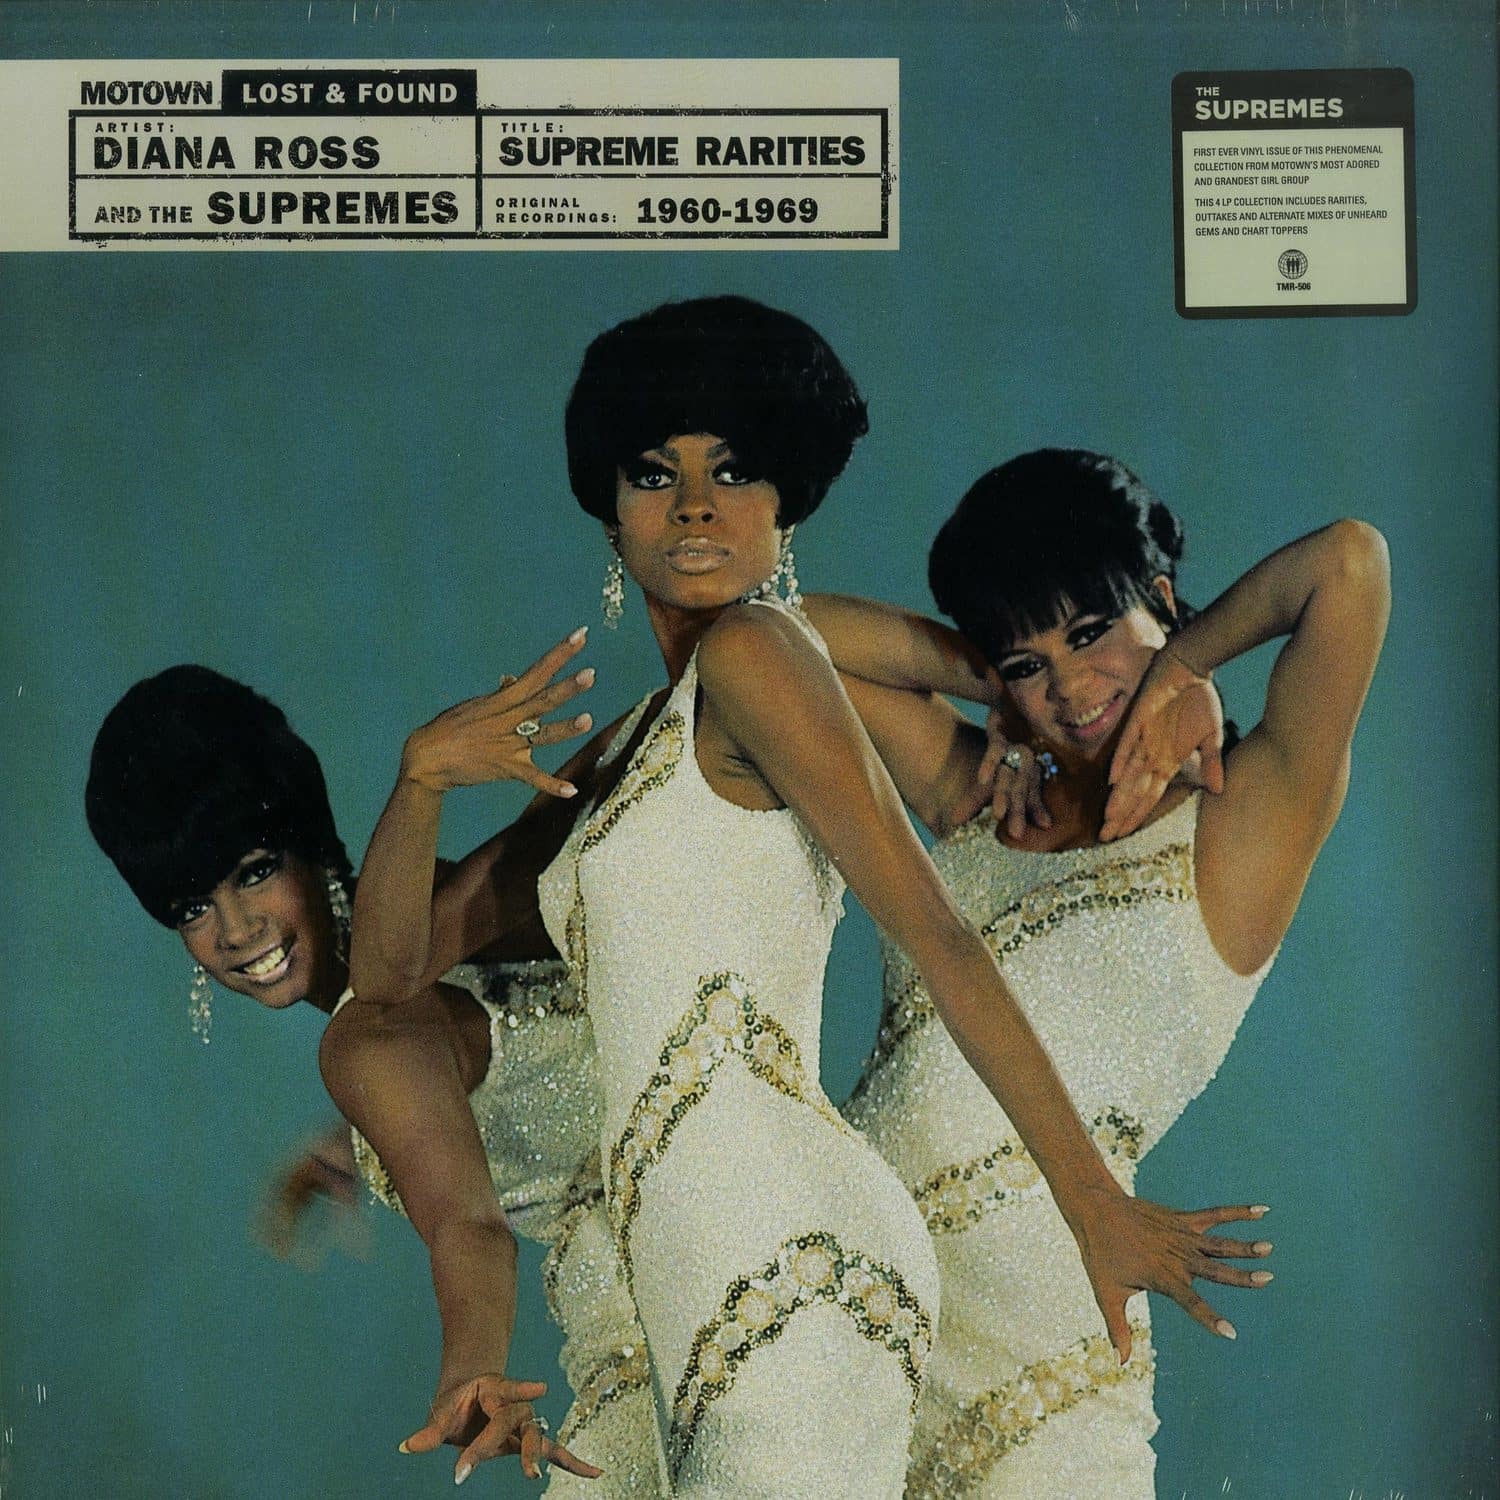 The Supremes - SUPREME RARITIES: MOTOWN LOST & FOUND 